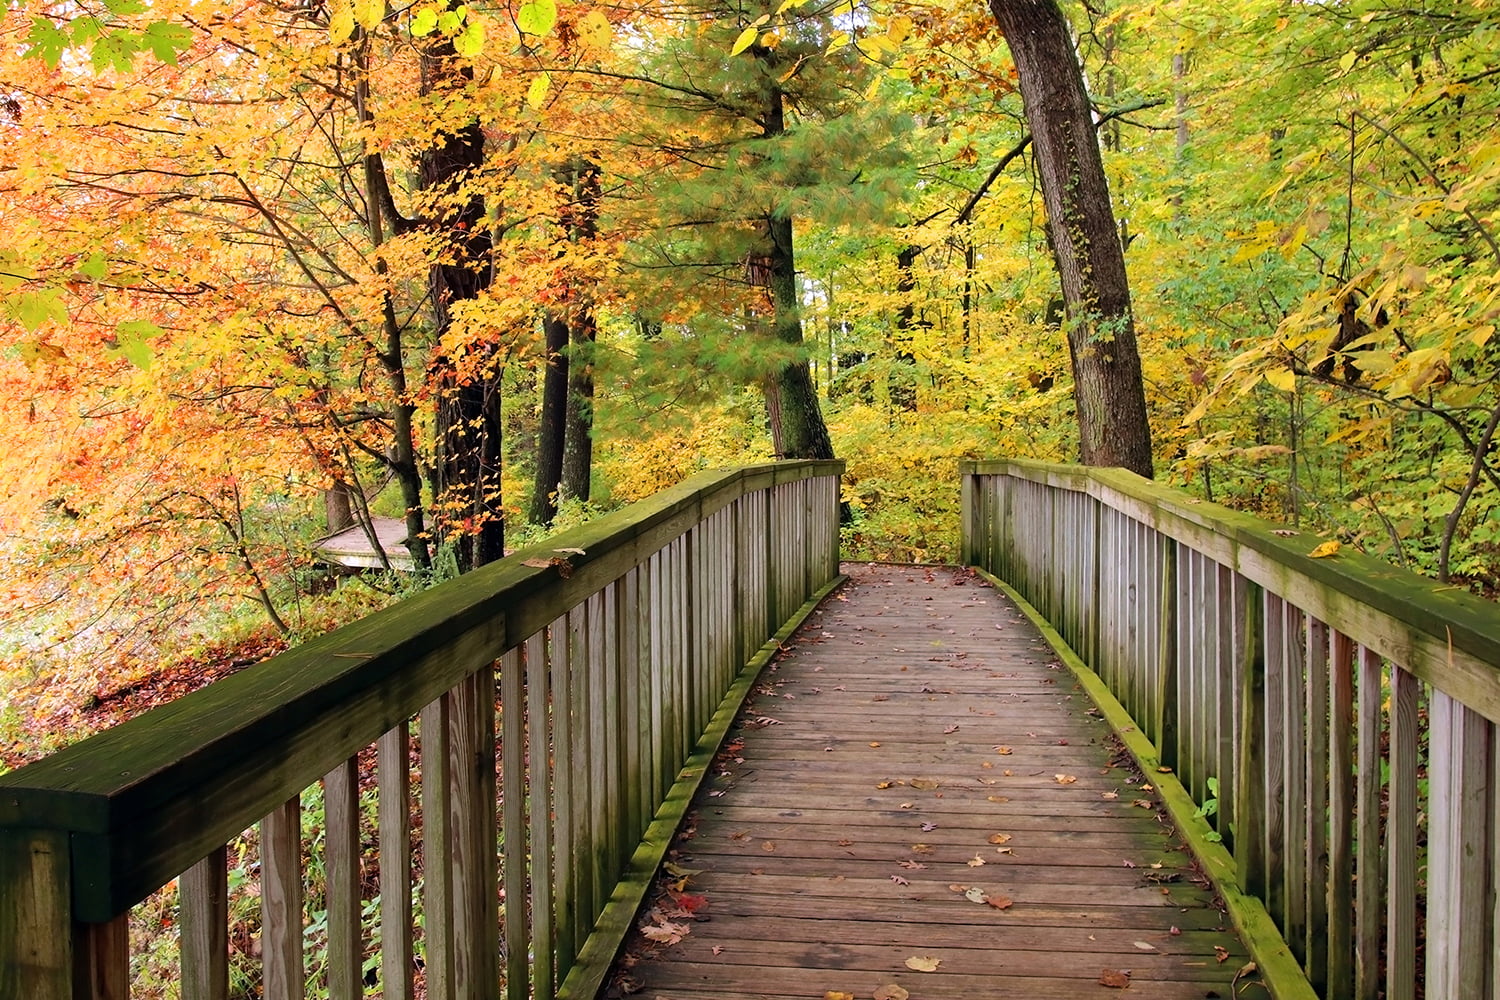 Scenic landscape with wooden boardwalk and hiking trail through colorful trees along lake